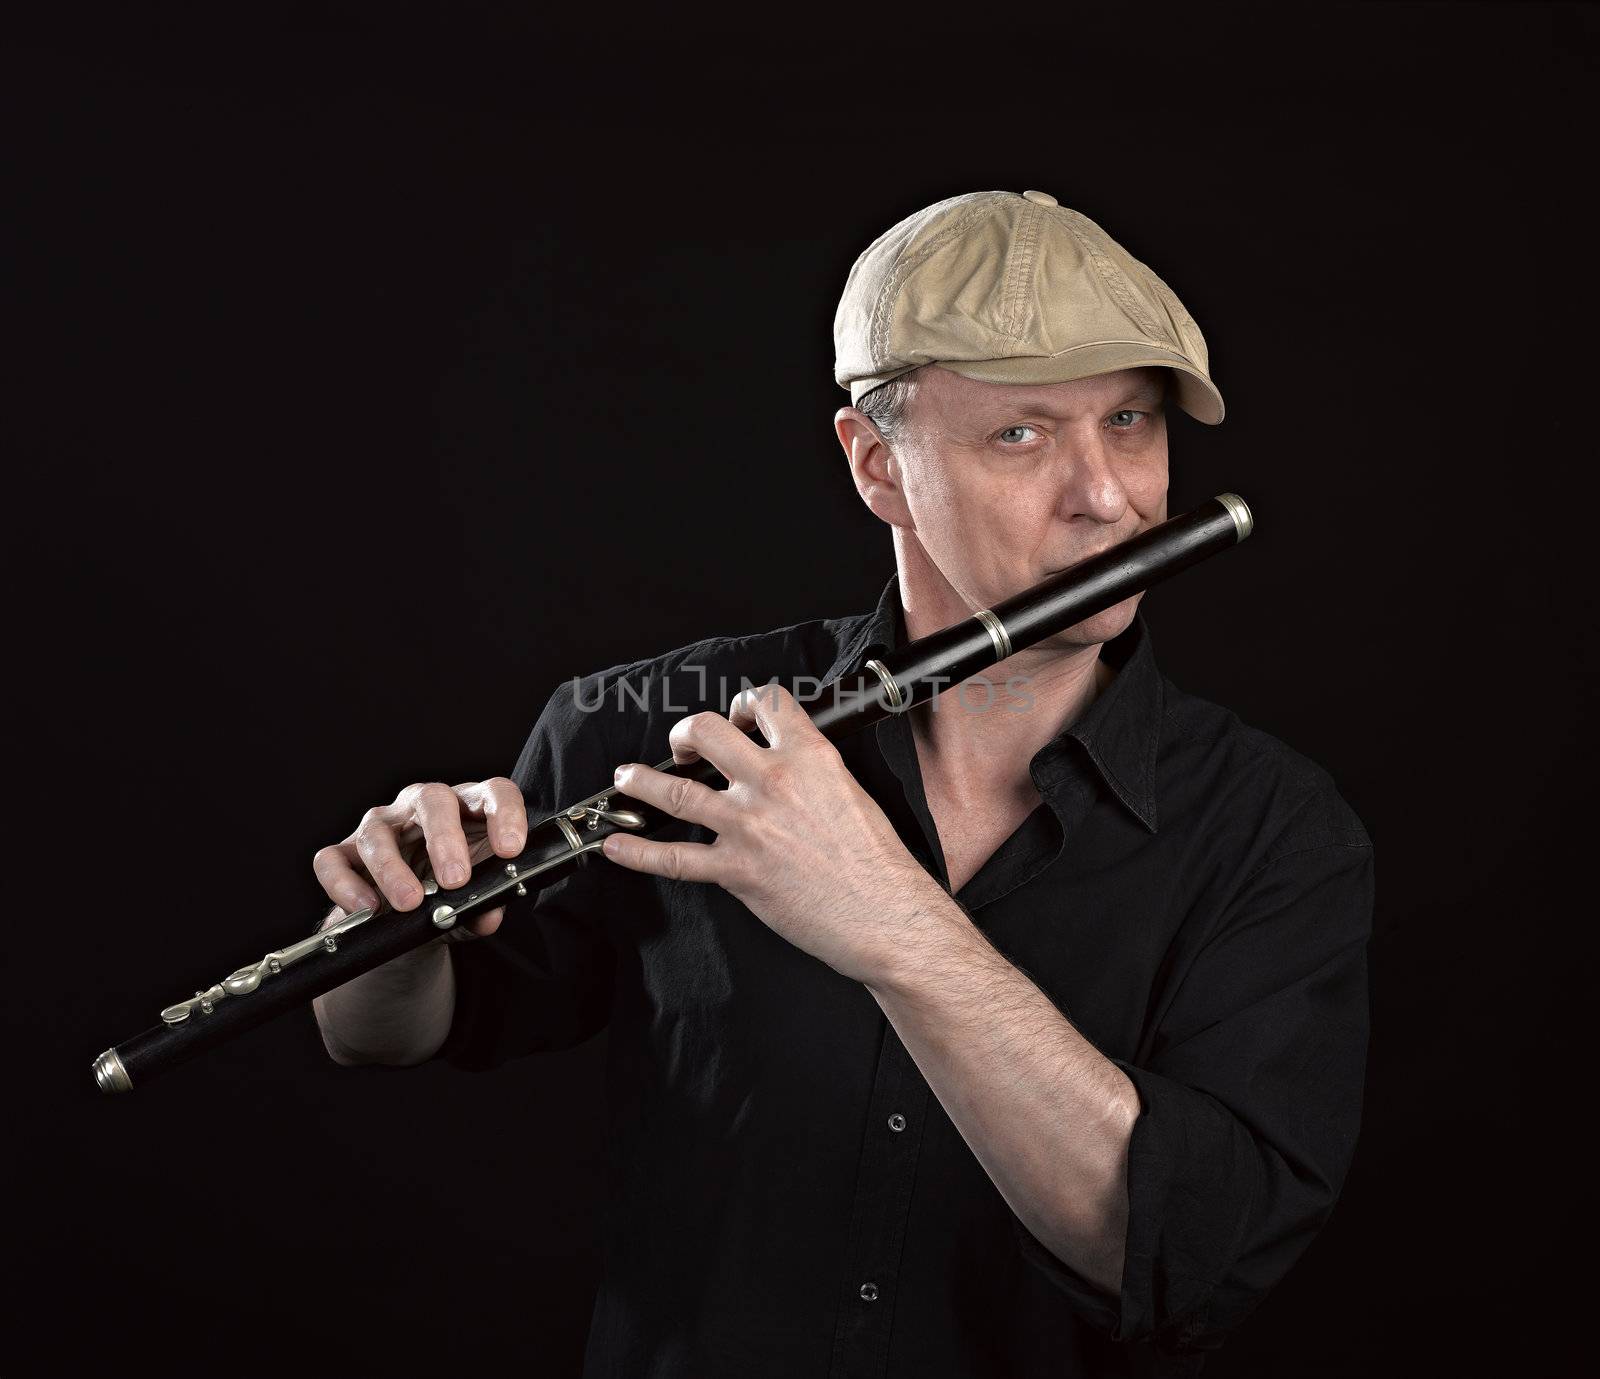 Portrait of a man playing ols wooden transverse flute, isolated on black